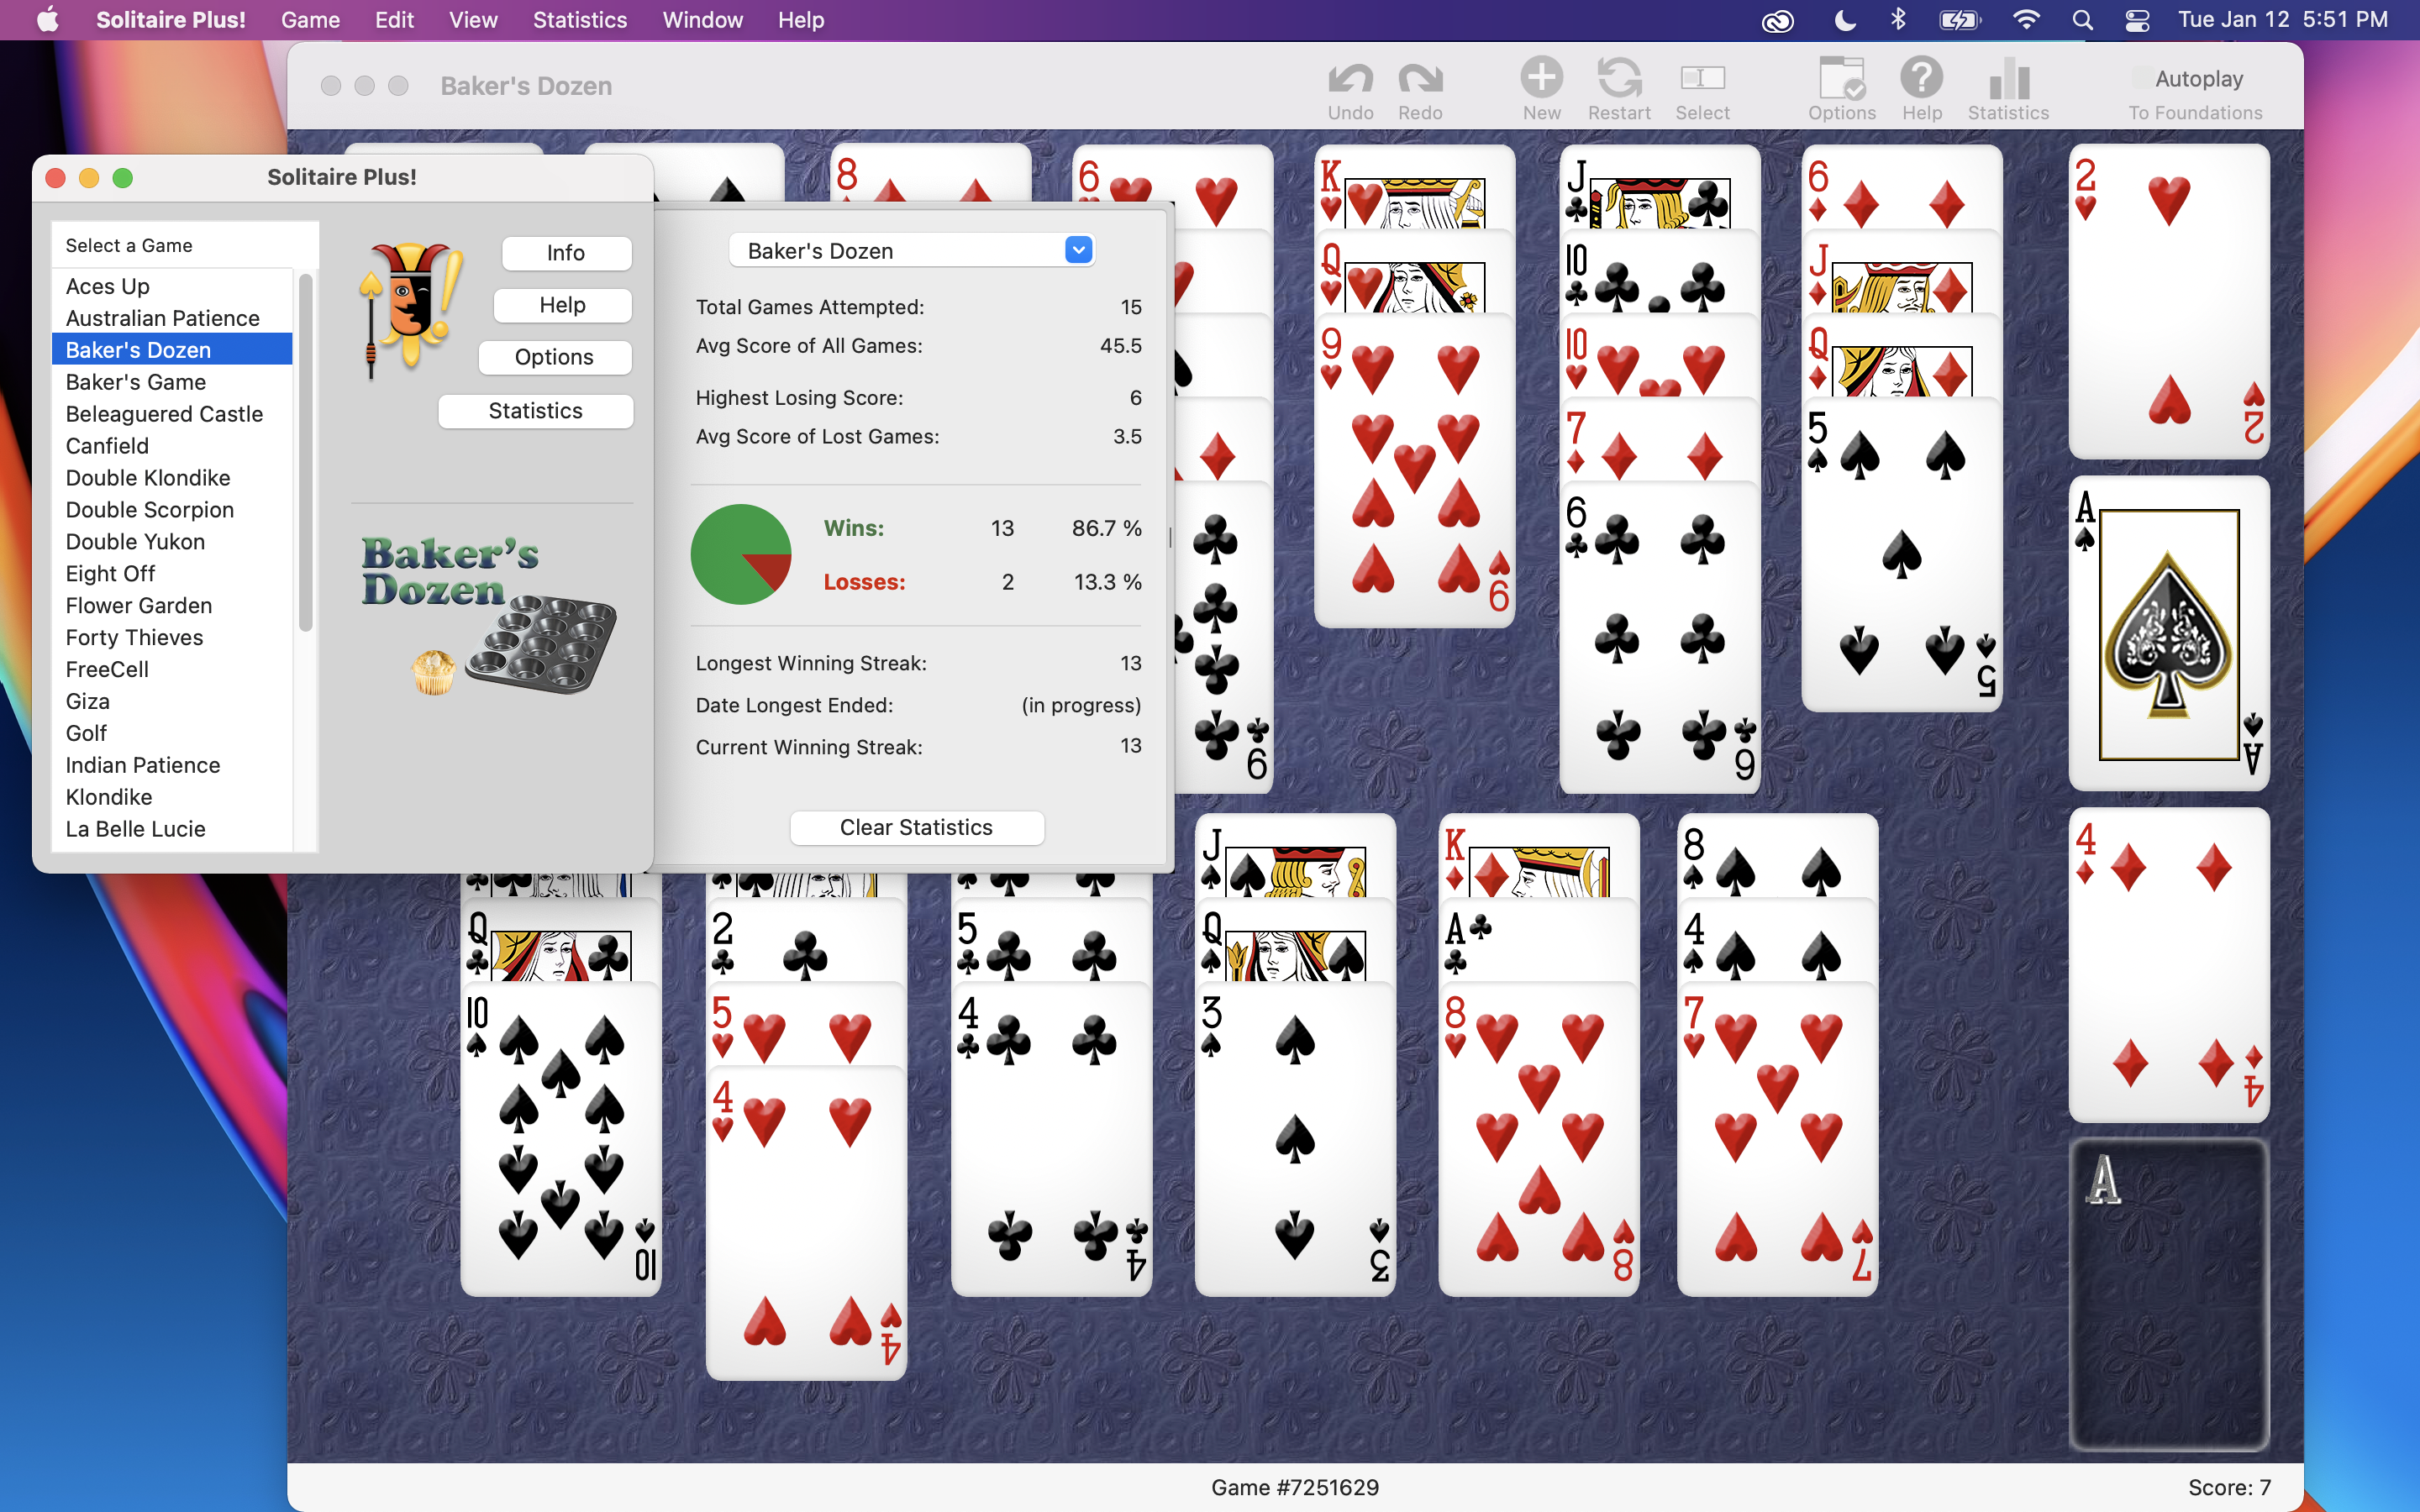 FreeCell Plus - FreeCell Solitaire Card Game for Windows and Mac